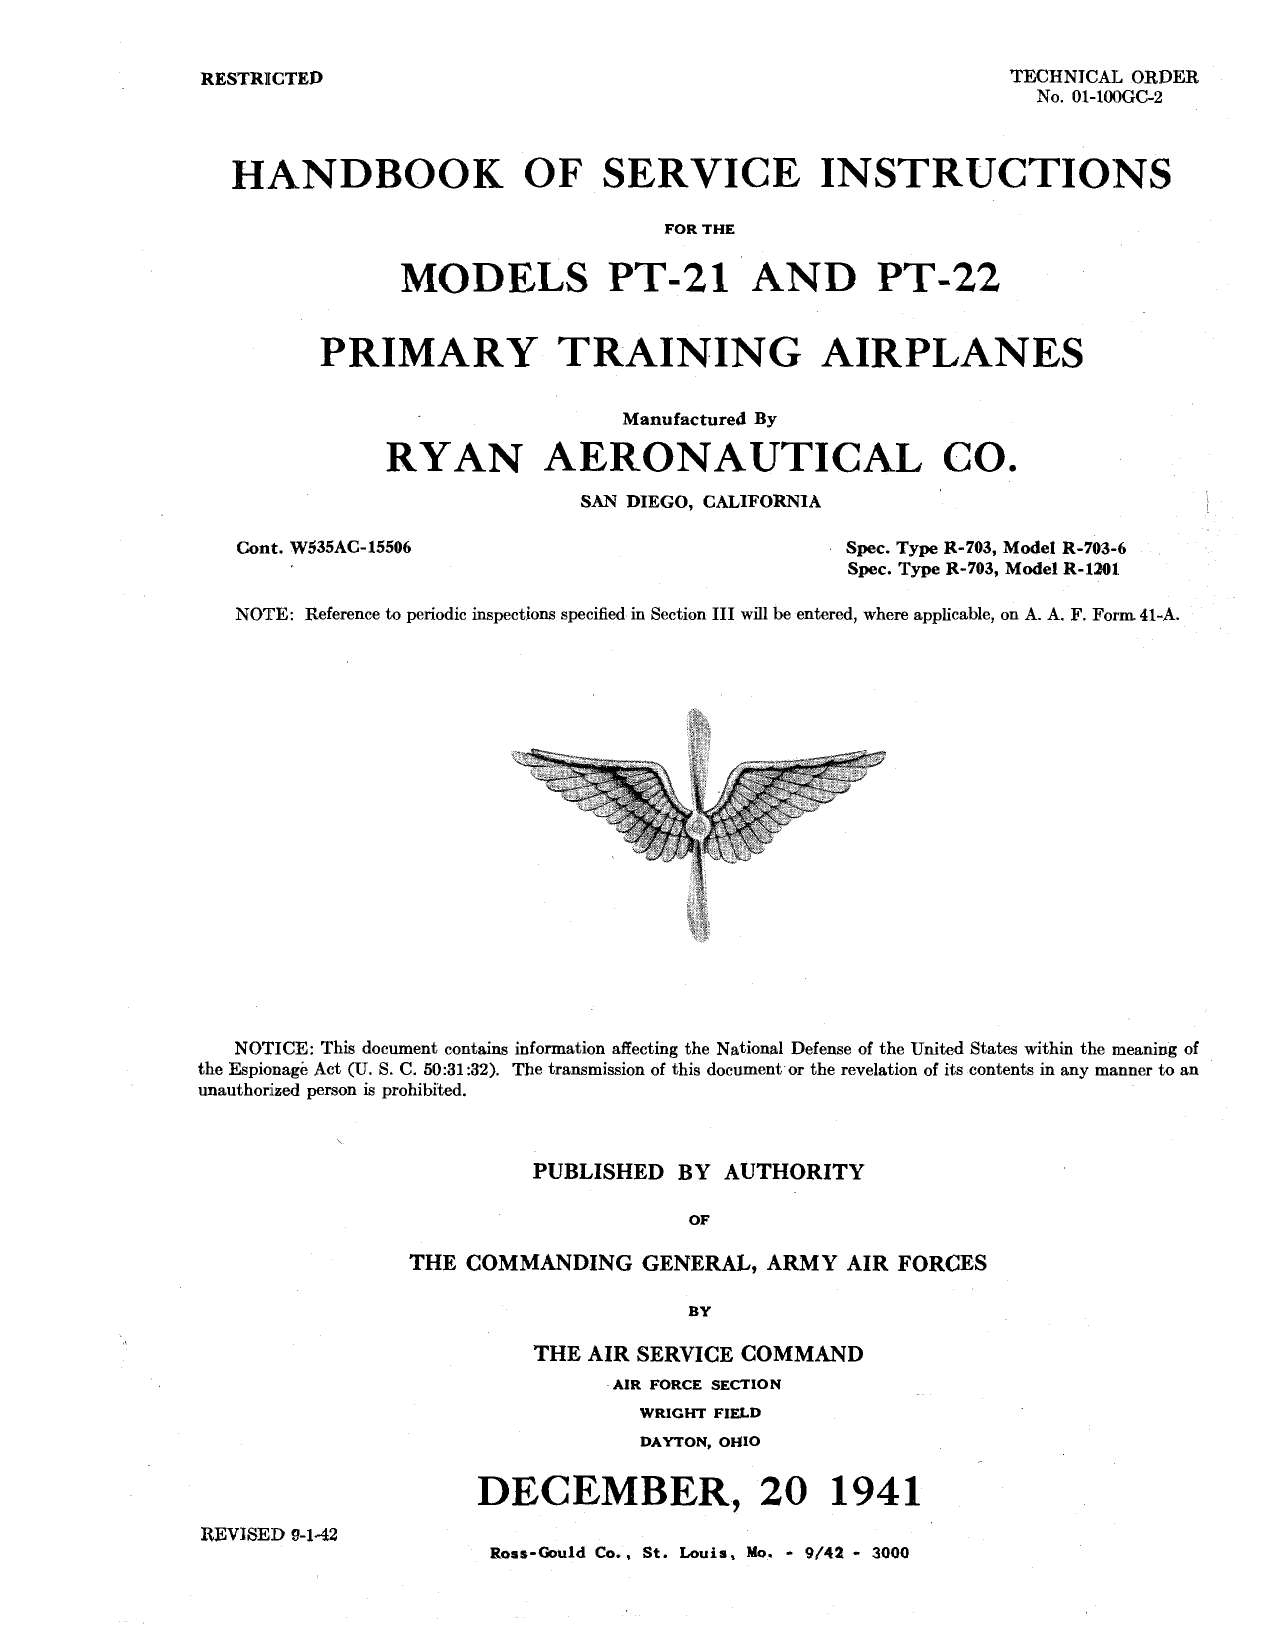 Sample page 1 from AirCorps Library document: Service Instructions for Models PT-21 and PT-22 Primary Training Airplanes